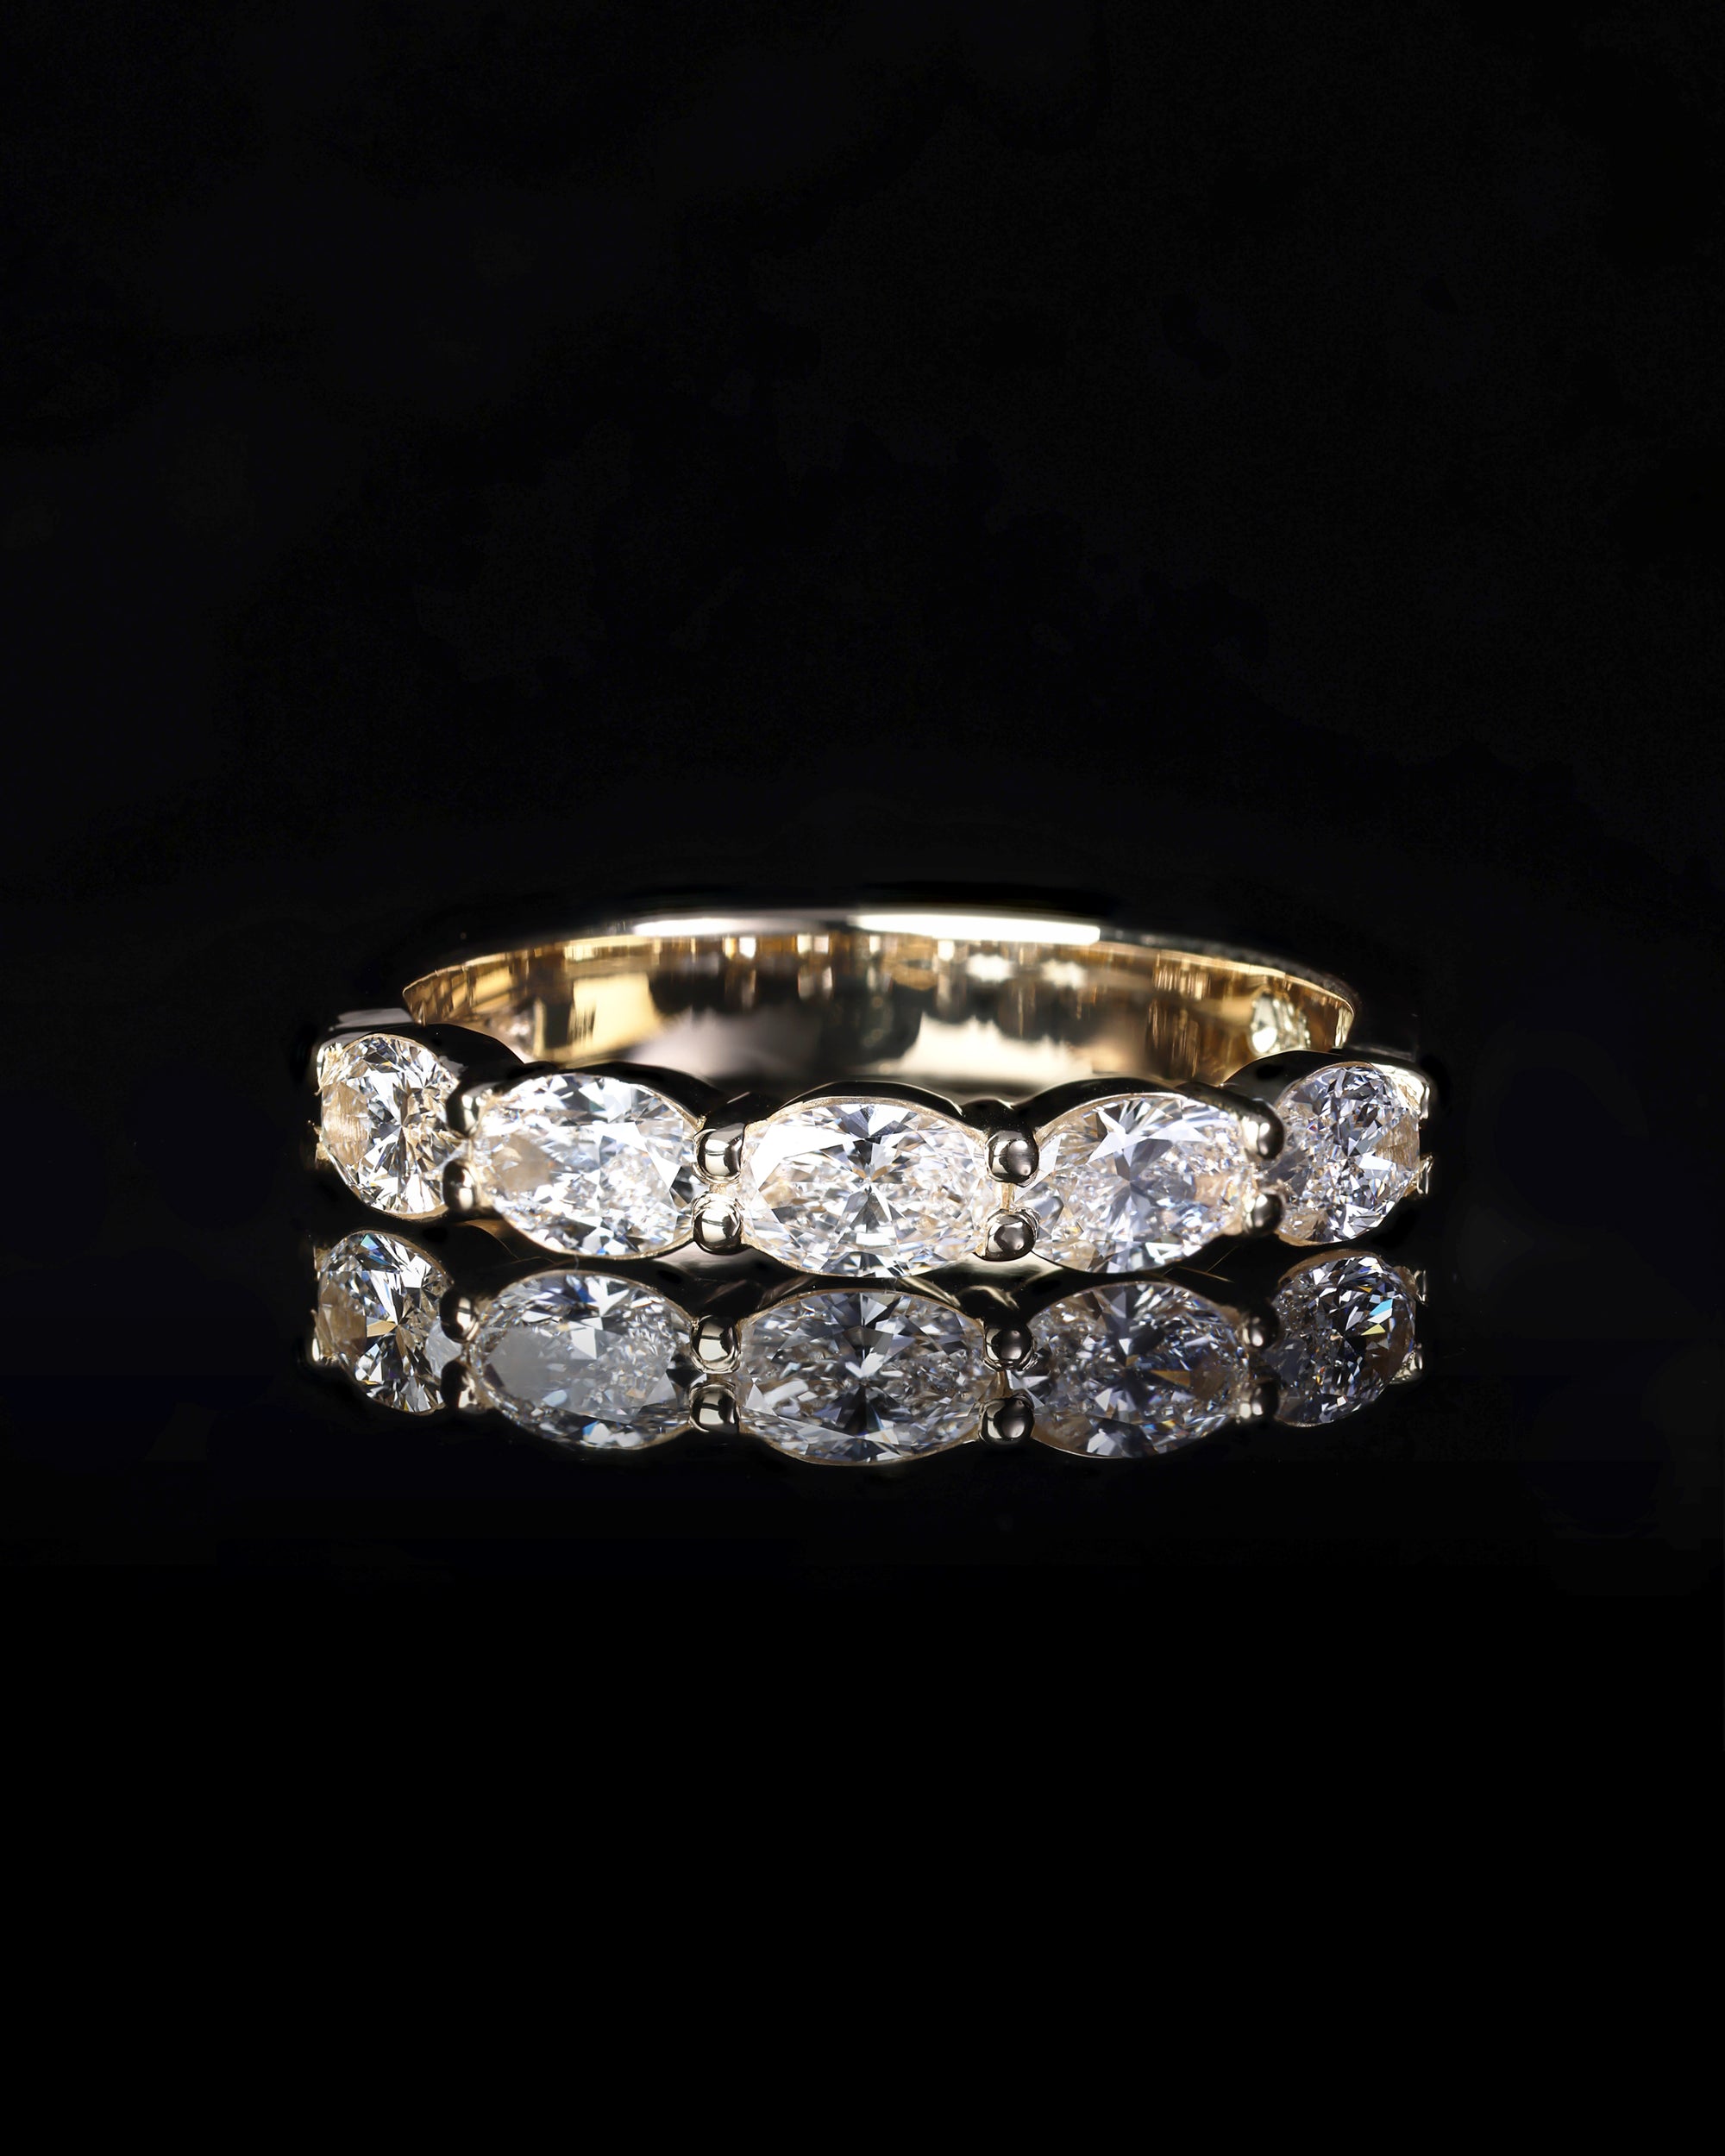 Oval Diamond Band in 18ct Yellow Gold with East-West setting